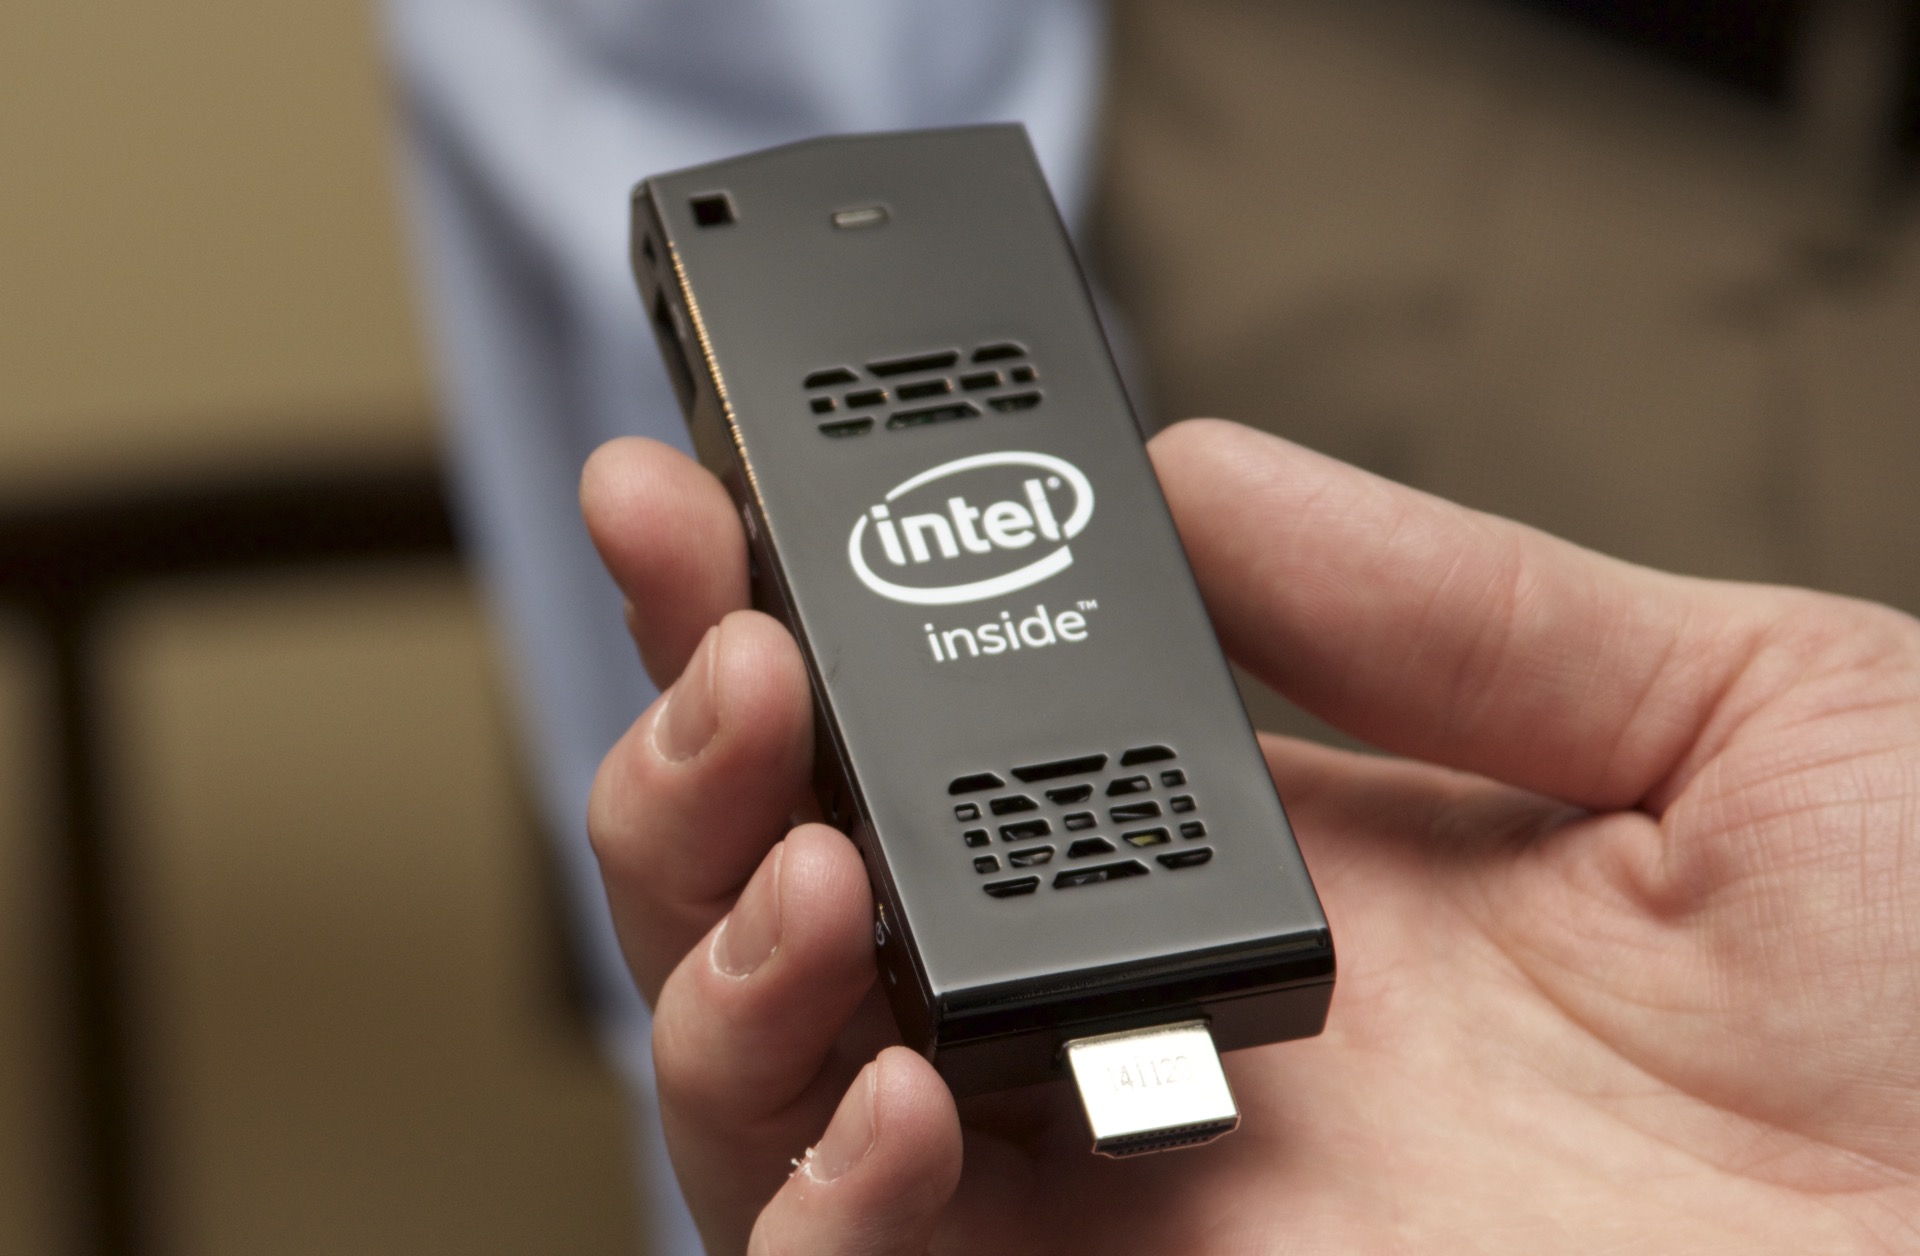 how-to-control-intel-compute-stick-pc-with-smartphone